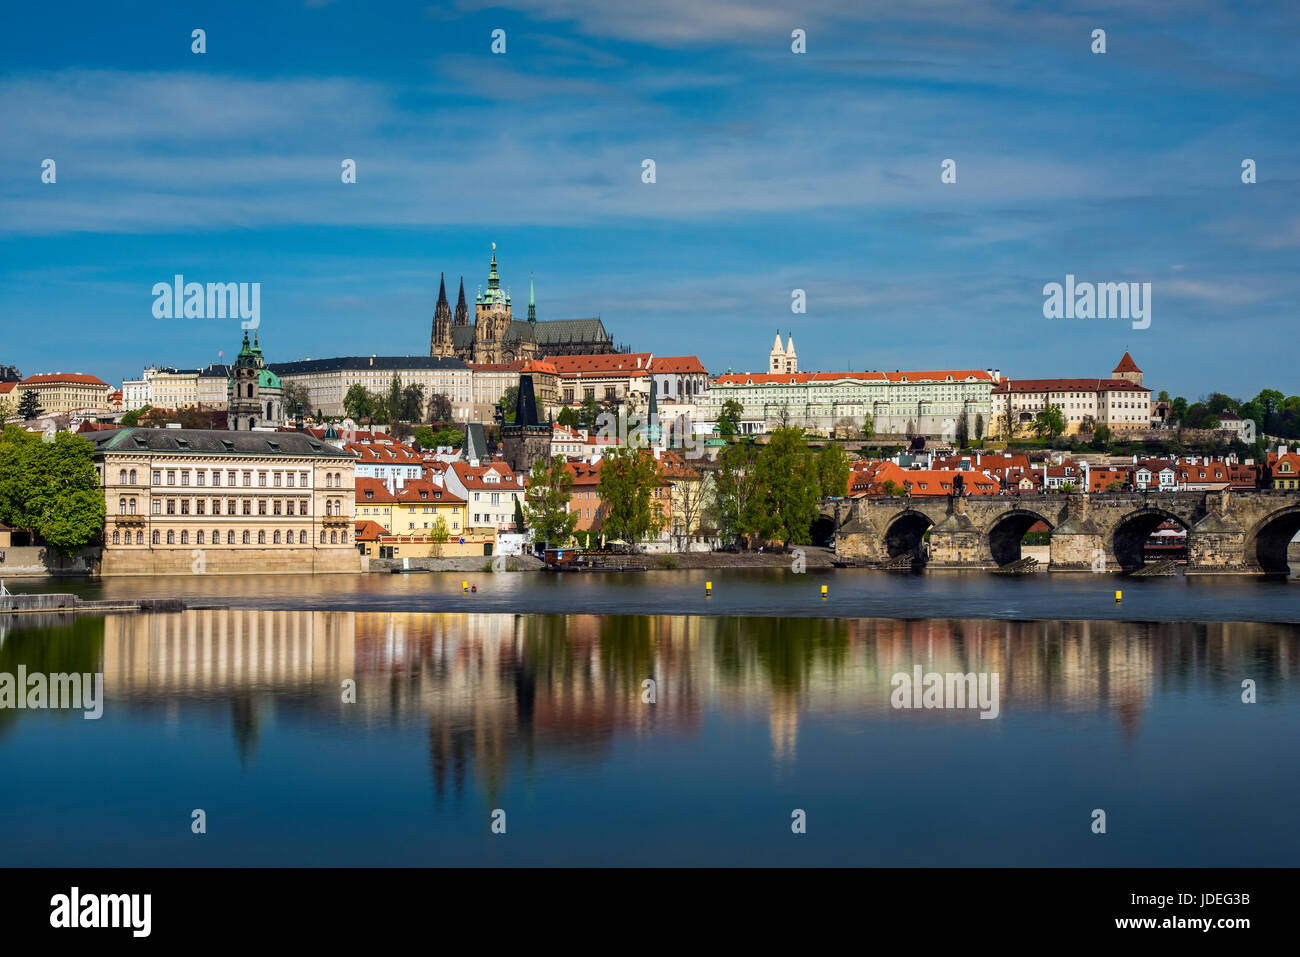 View of Mala Strana district with St. Vitus cathedral and Prague Castle complex, Prague, Bohemia, Czech Republic Stock Photo